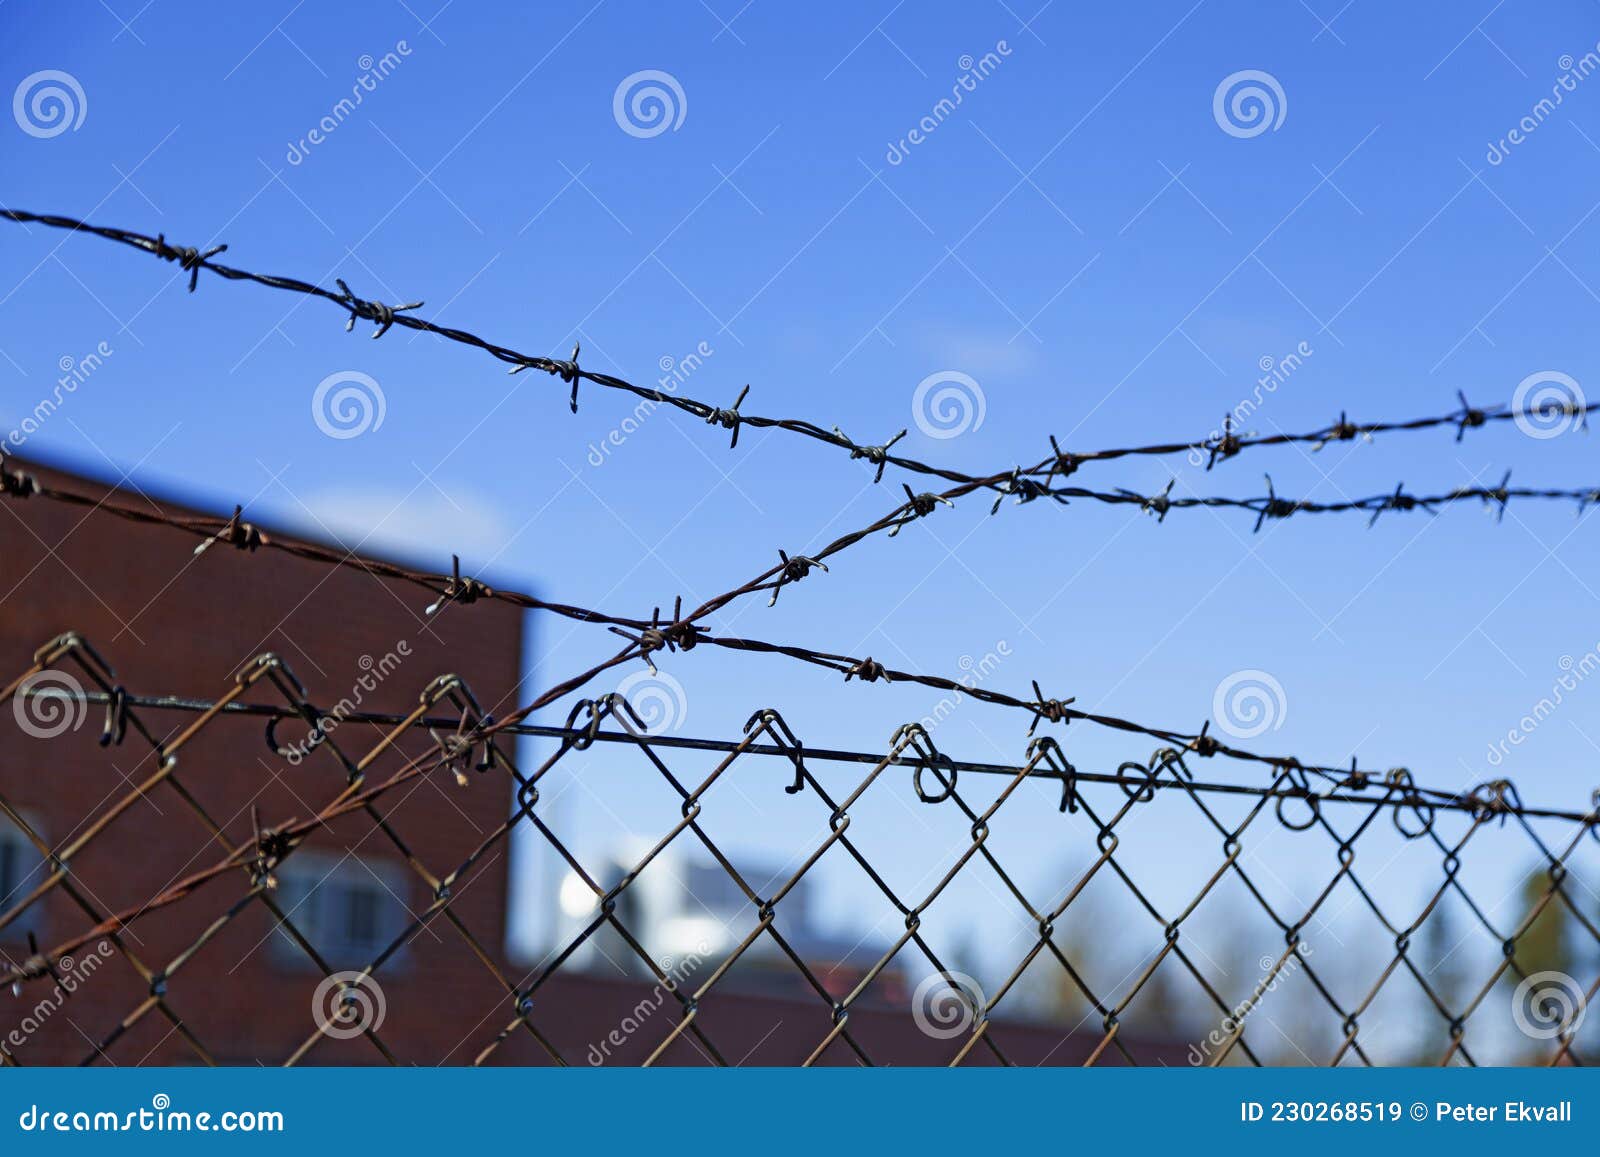 Fence of Chicken Net in Metal with Barbed Wire Stock Image - Image